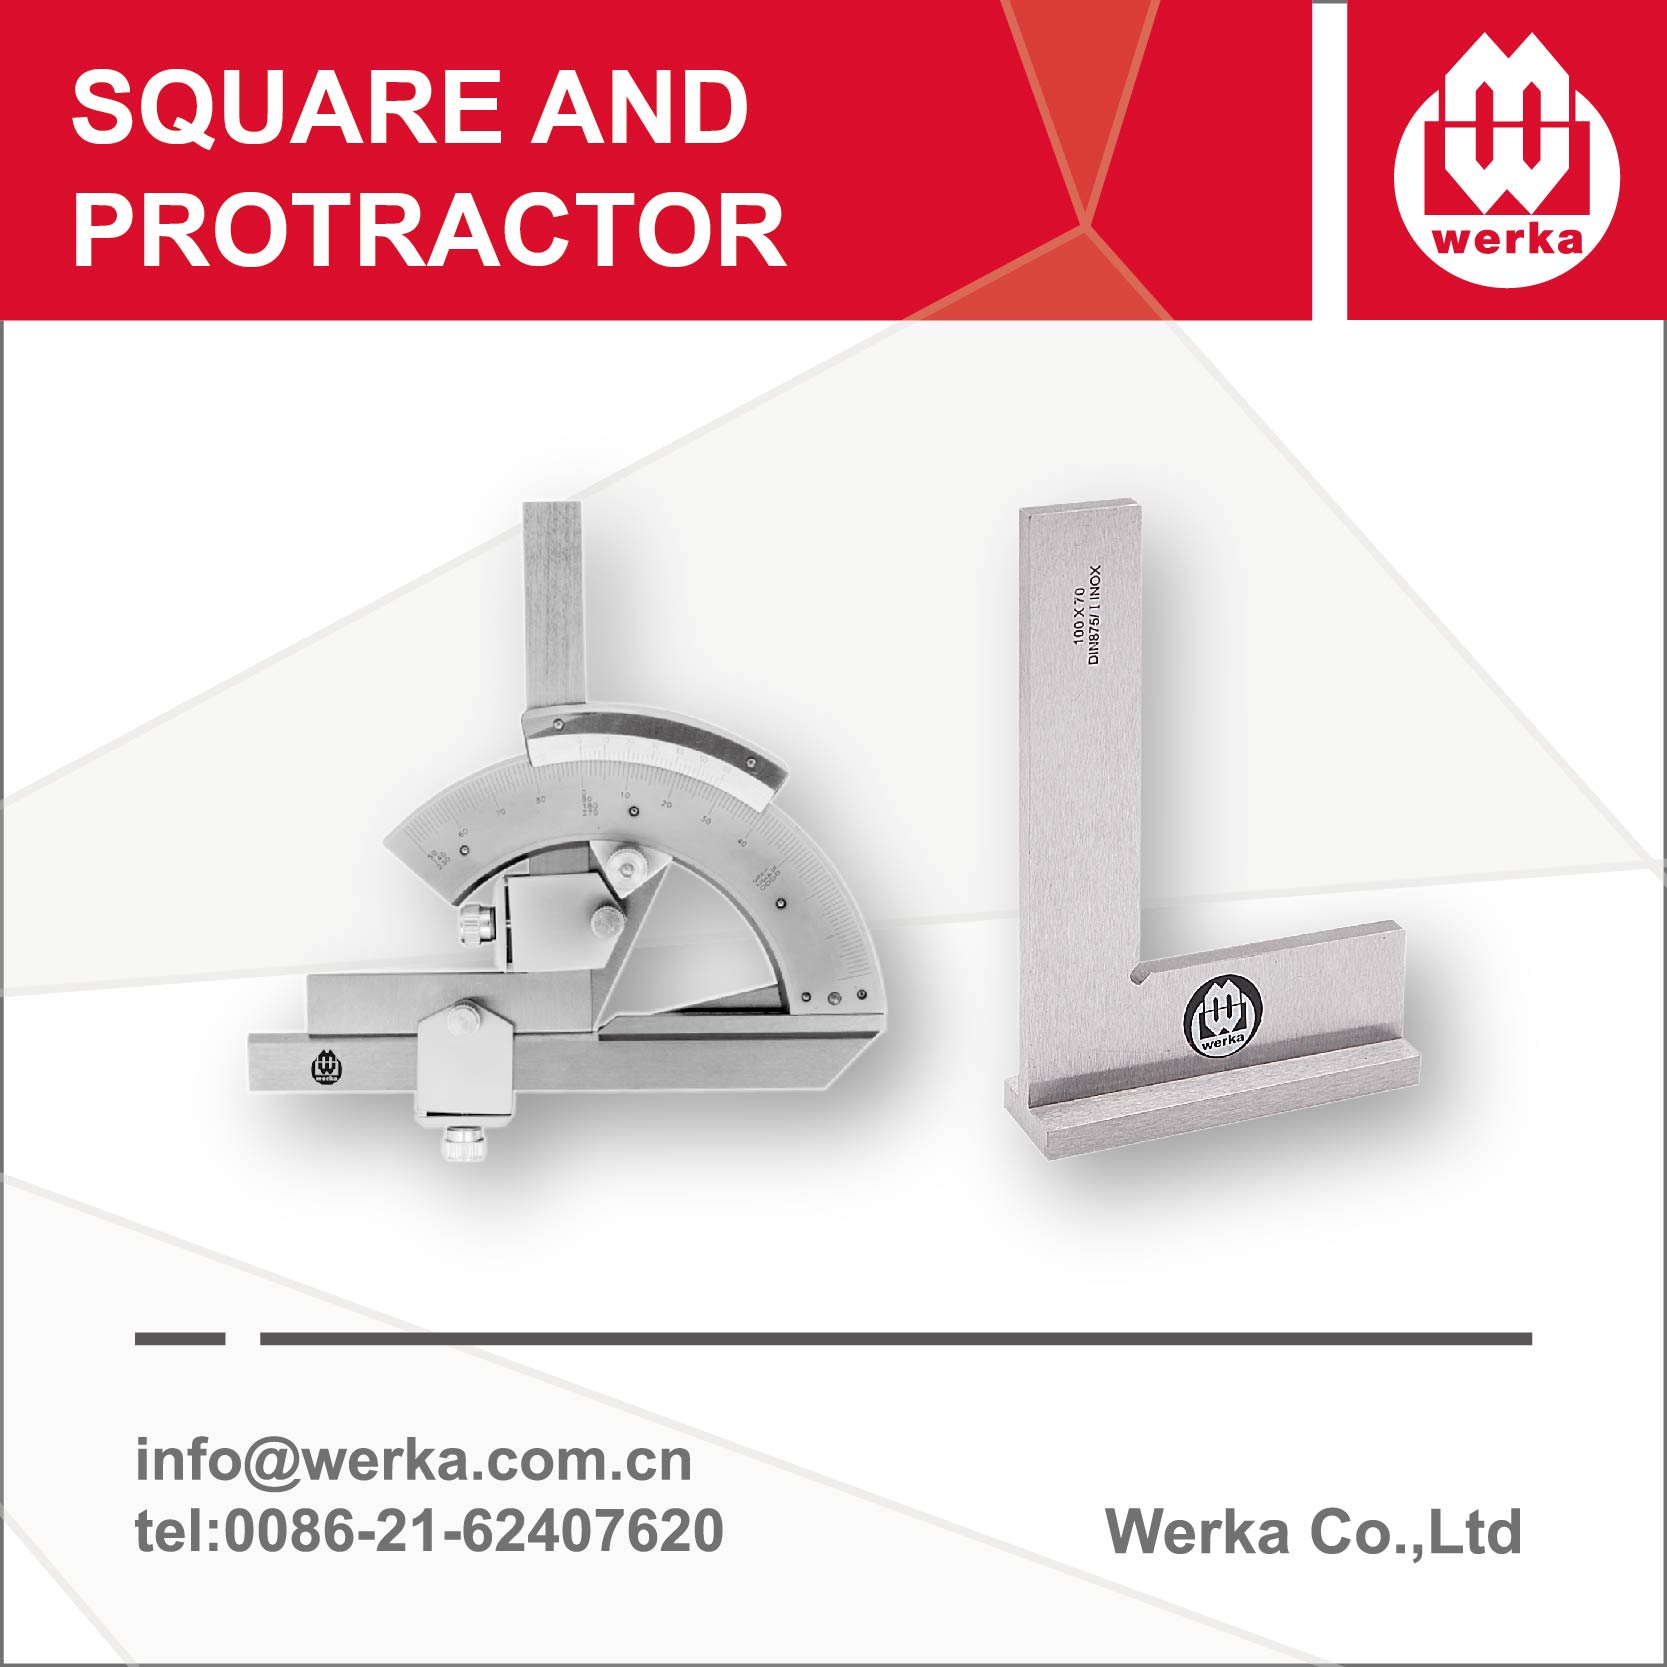 Square and protractor